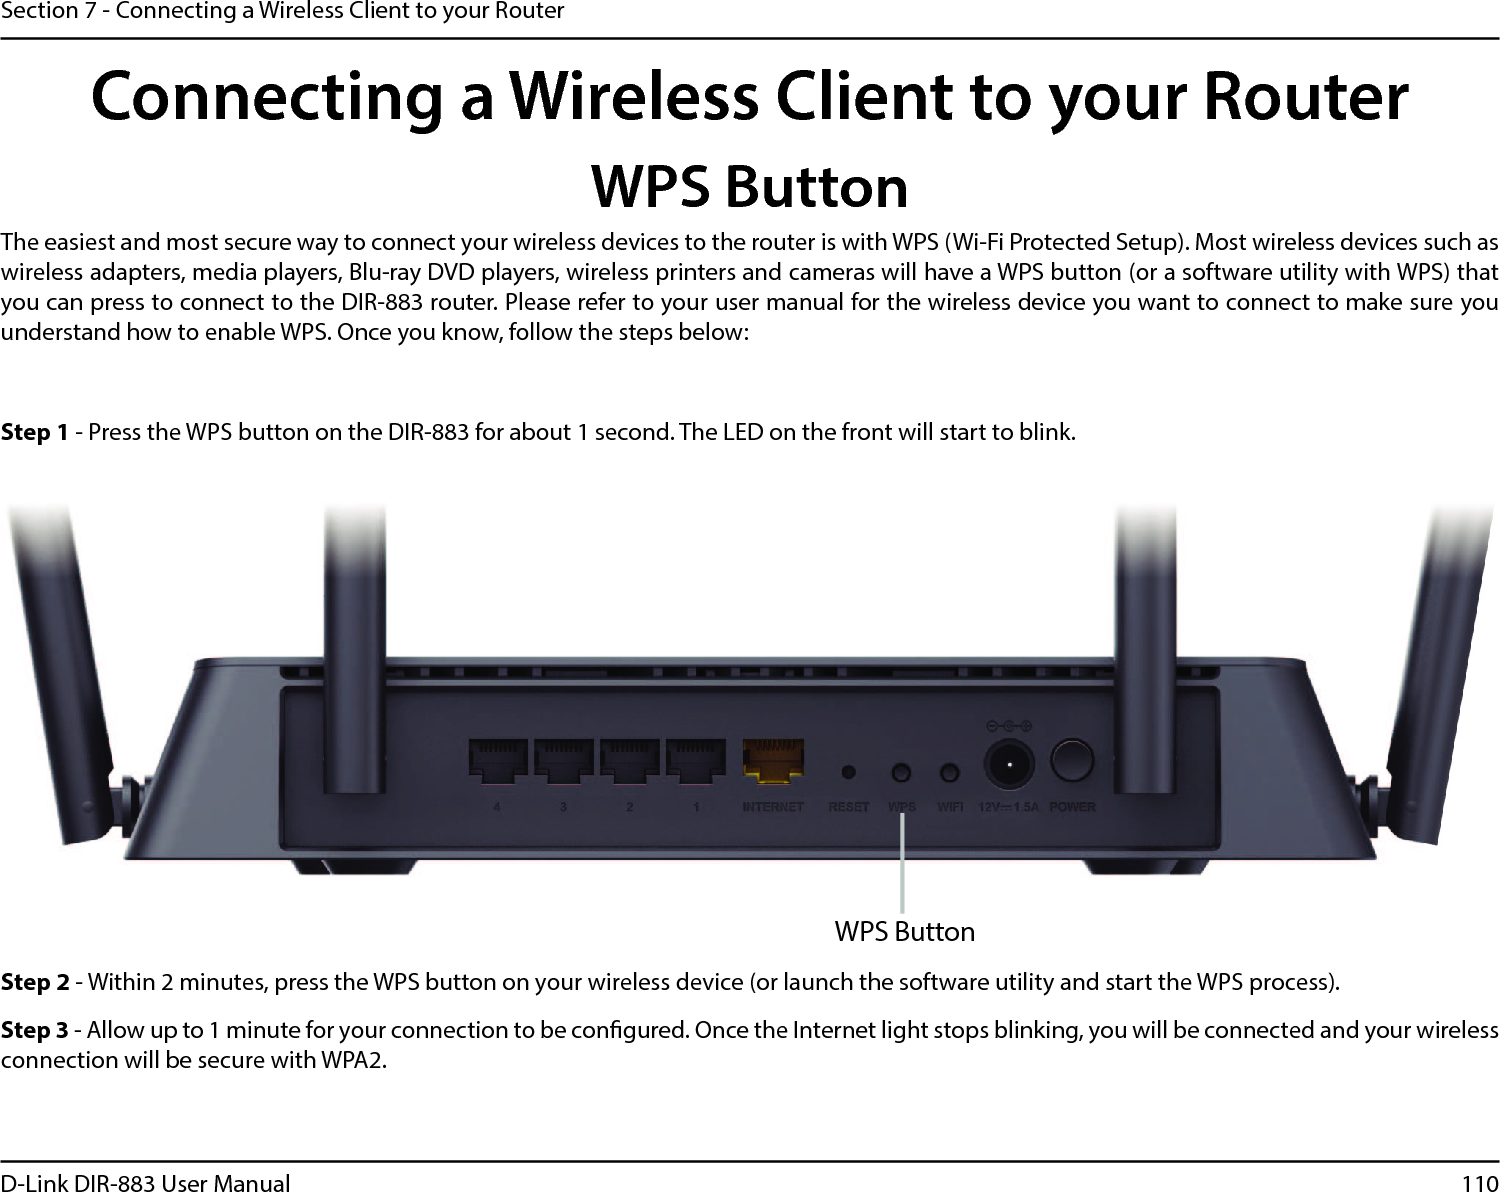 110D-Link DIR-883 User ManualSection 7 - Connecting a Wireless Client to your RouterConnecting a Wireless Client to your RouterWPS ButtonStep 2 - Within 2 minutes, press the WPS button on your wireless device (or launch the software utility and start the WPS process).The easiest and most secure way to connect your wireless devices to the router is with WPS (Wi-Fi Protected Setup). Most wireless devices such as wireless adapters, media players, Blu-ray DVD players, wireless printers and cameras will have a WPS button (or a software utility with WPS) that you can press to connect to the DIR-883 router. Please refer to your user manual for the wireless device you want to connect to make sure you understand how to enable WPS. Once you know, follow the steps below:Step 1 - Press the WPS button on the DIR-883 for about 1 second. The LED on the front will start to blink.Step 3 - Allow up to 1 minute for your connection to be congured. Once the Internet light stops blinking, you will be connected and your wireless connection will be secure with WPA2.WPS Button